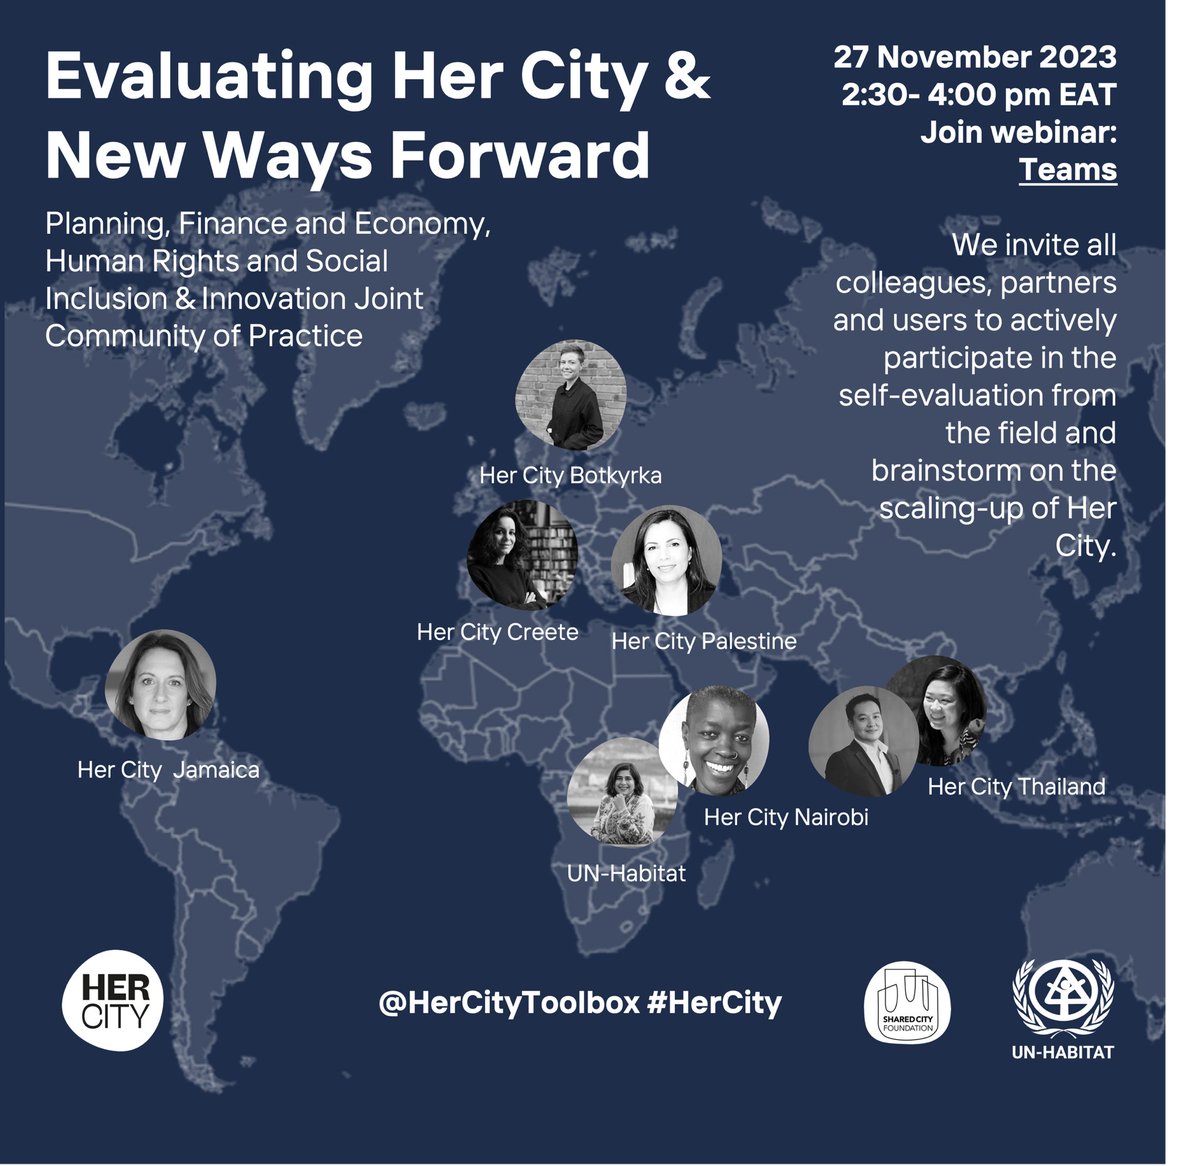 Participate in our #CommunityOfPractice to explore the future of #HerCity together?

📆 Monday 27 November 2023 
⏰2:30-4:00 pm EAT 
👩‍💻Join: shorturl.at/moCDM

Our colleagues, partners and users actively evaluate and brainstorm on the scaling-up of Her City.

#SharedCity